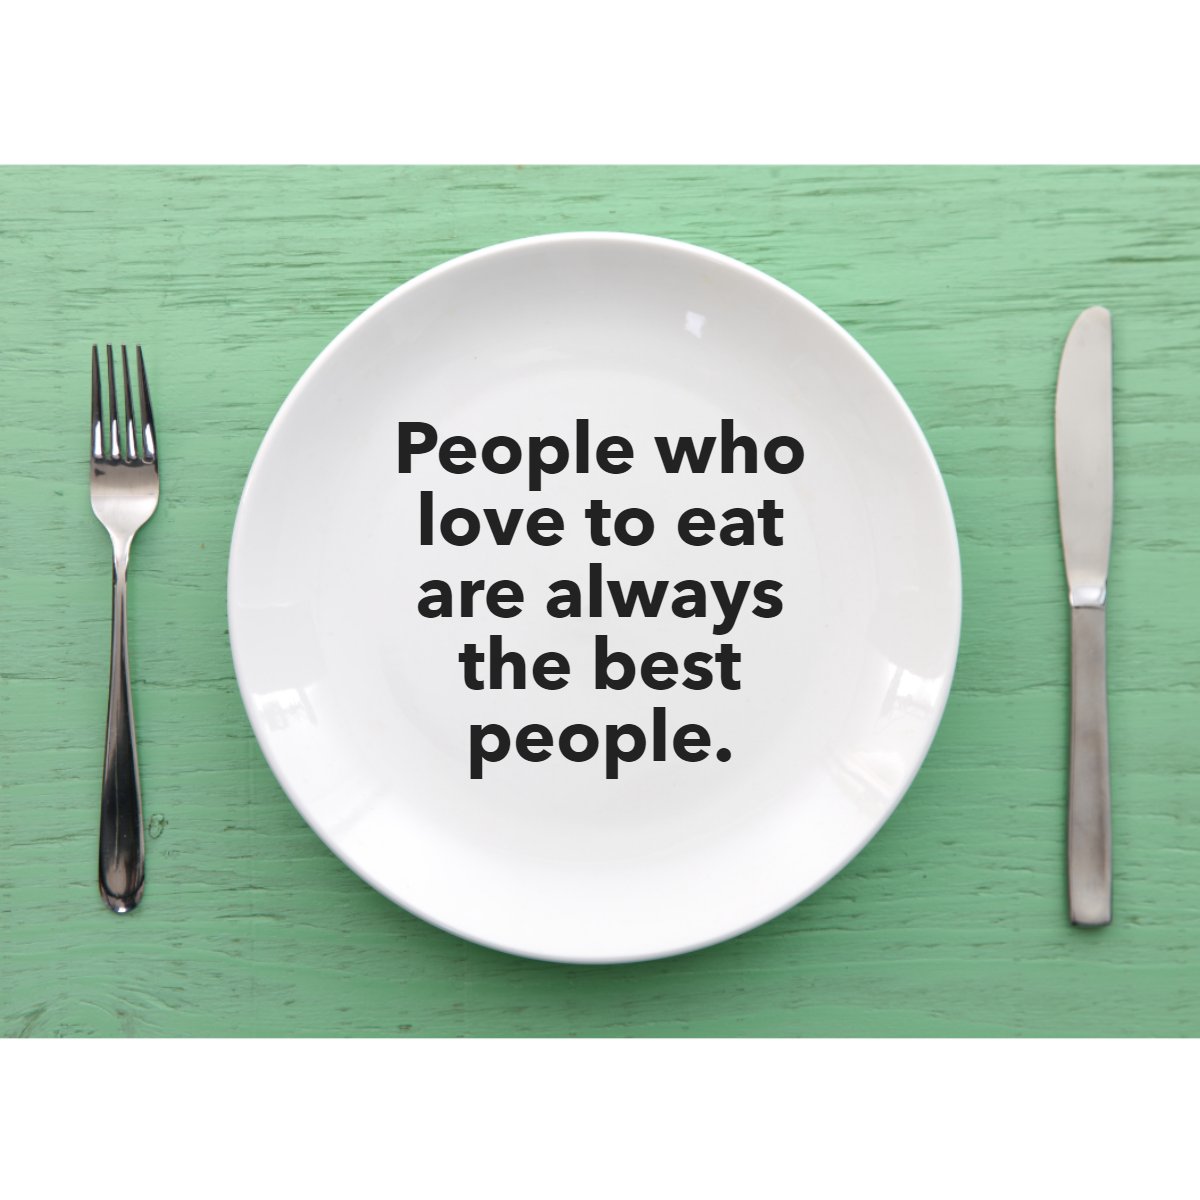 'People who love to eat are always the best people.' 
–  Julia Child

#goodfood  #goodpeople  #goodmoodfood  #goodtimeswithgoodpeople  #foodisgood  #goodtimeswithgreatpeople  #goodfoodgoodlife